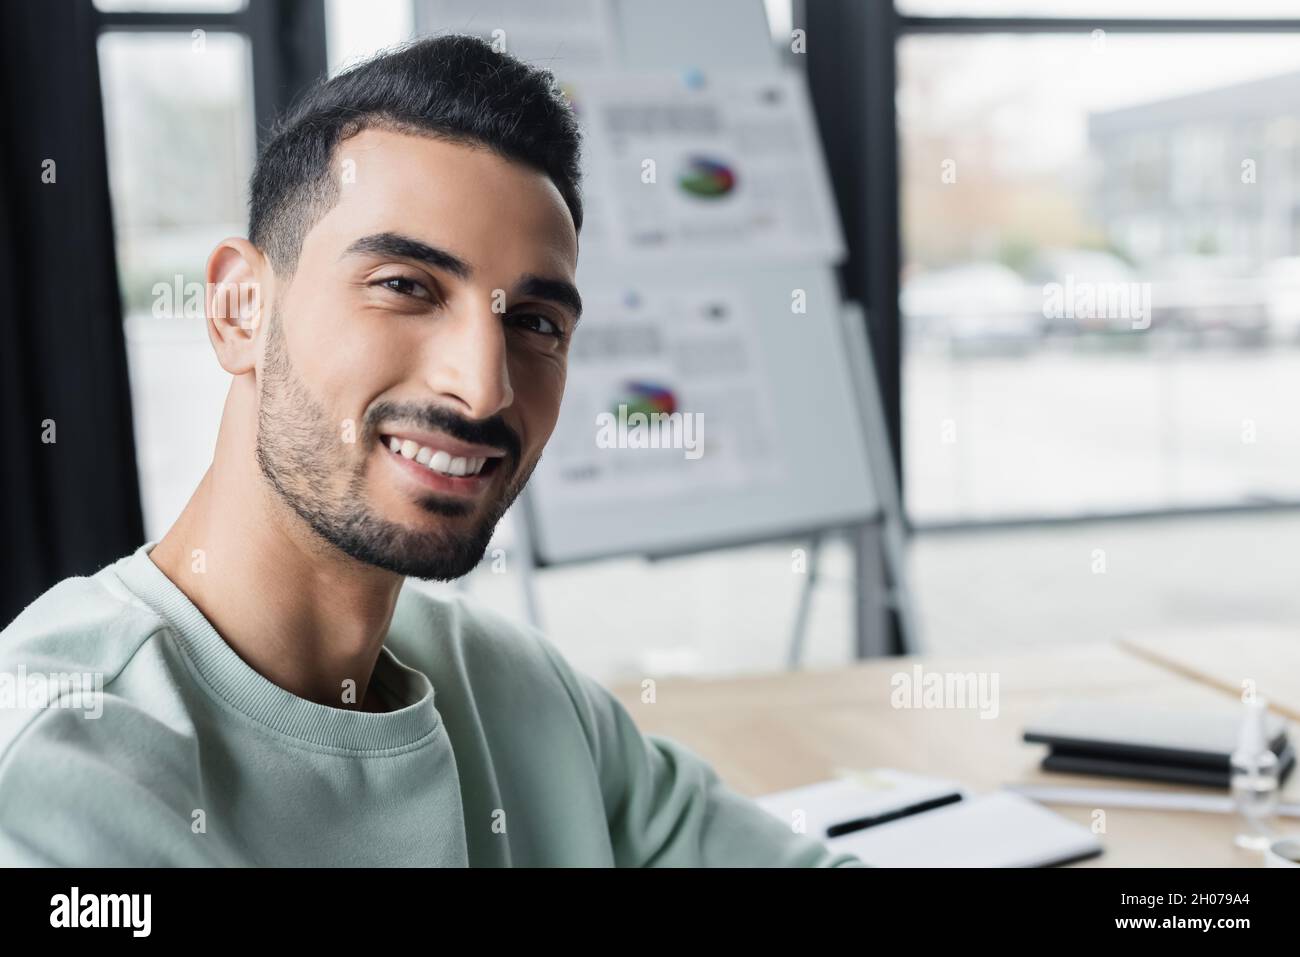 Muslim businessman in casual clothes smiling at camera in office Stock Photo